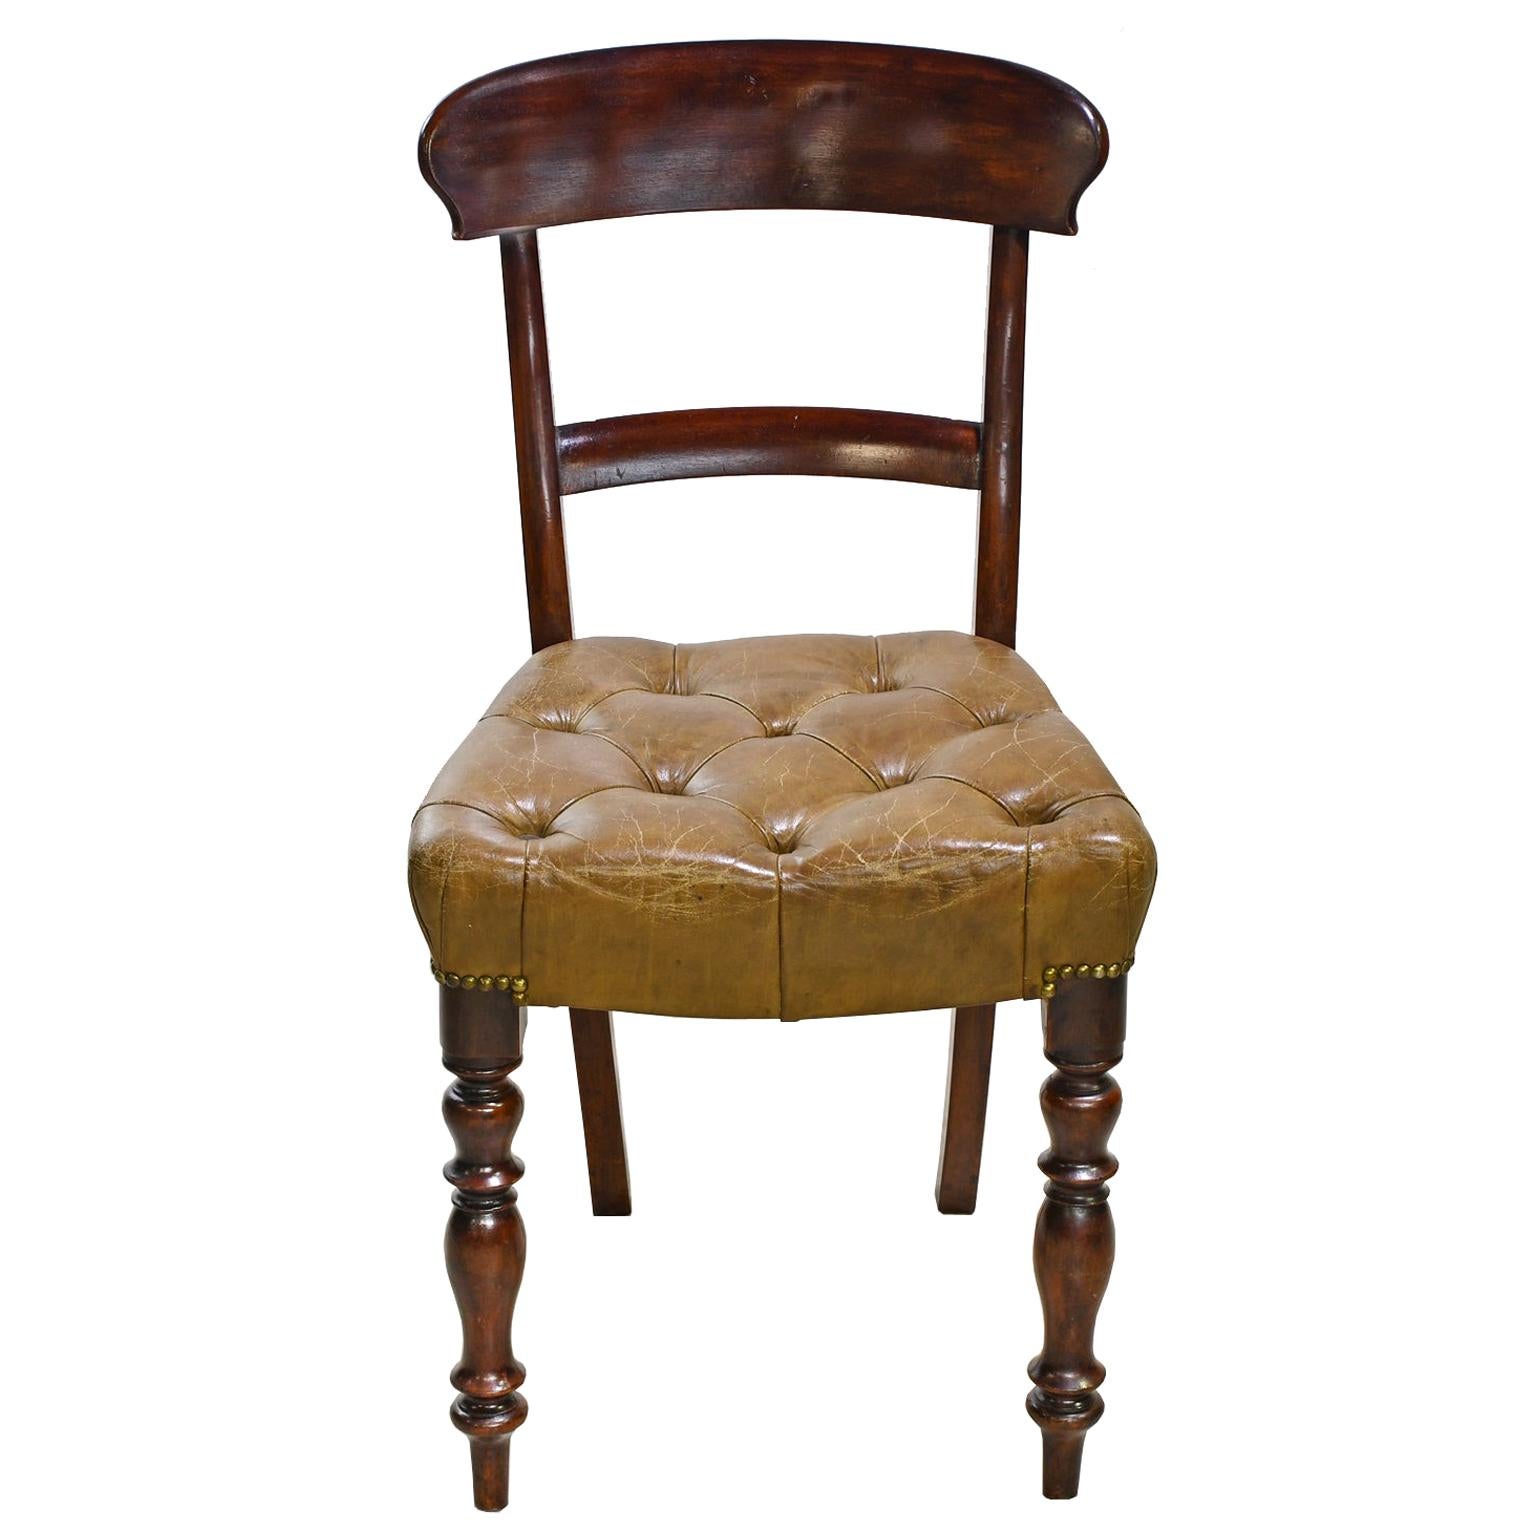 Early Victorian Mahogany Chair with Tufted Leather Upholstery, England For Sale